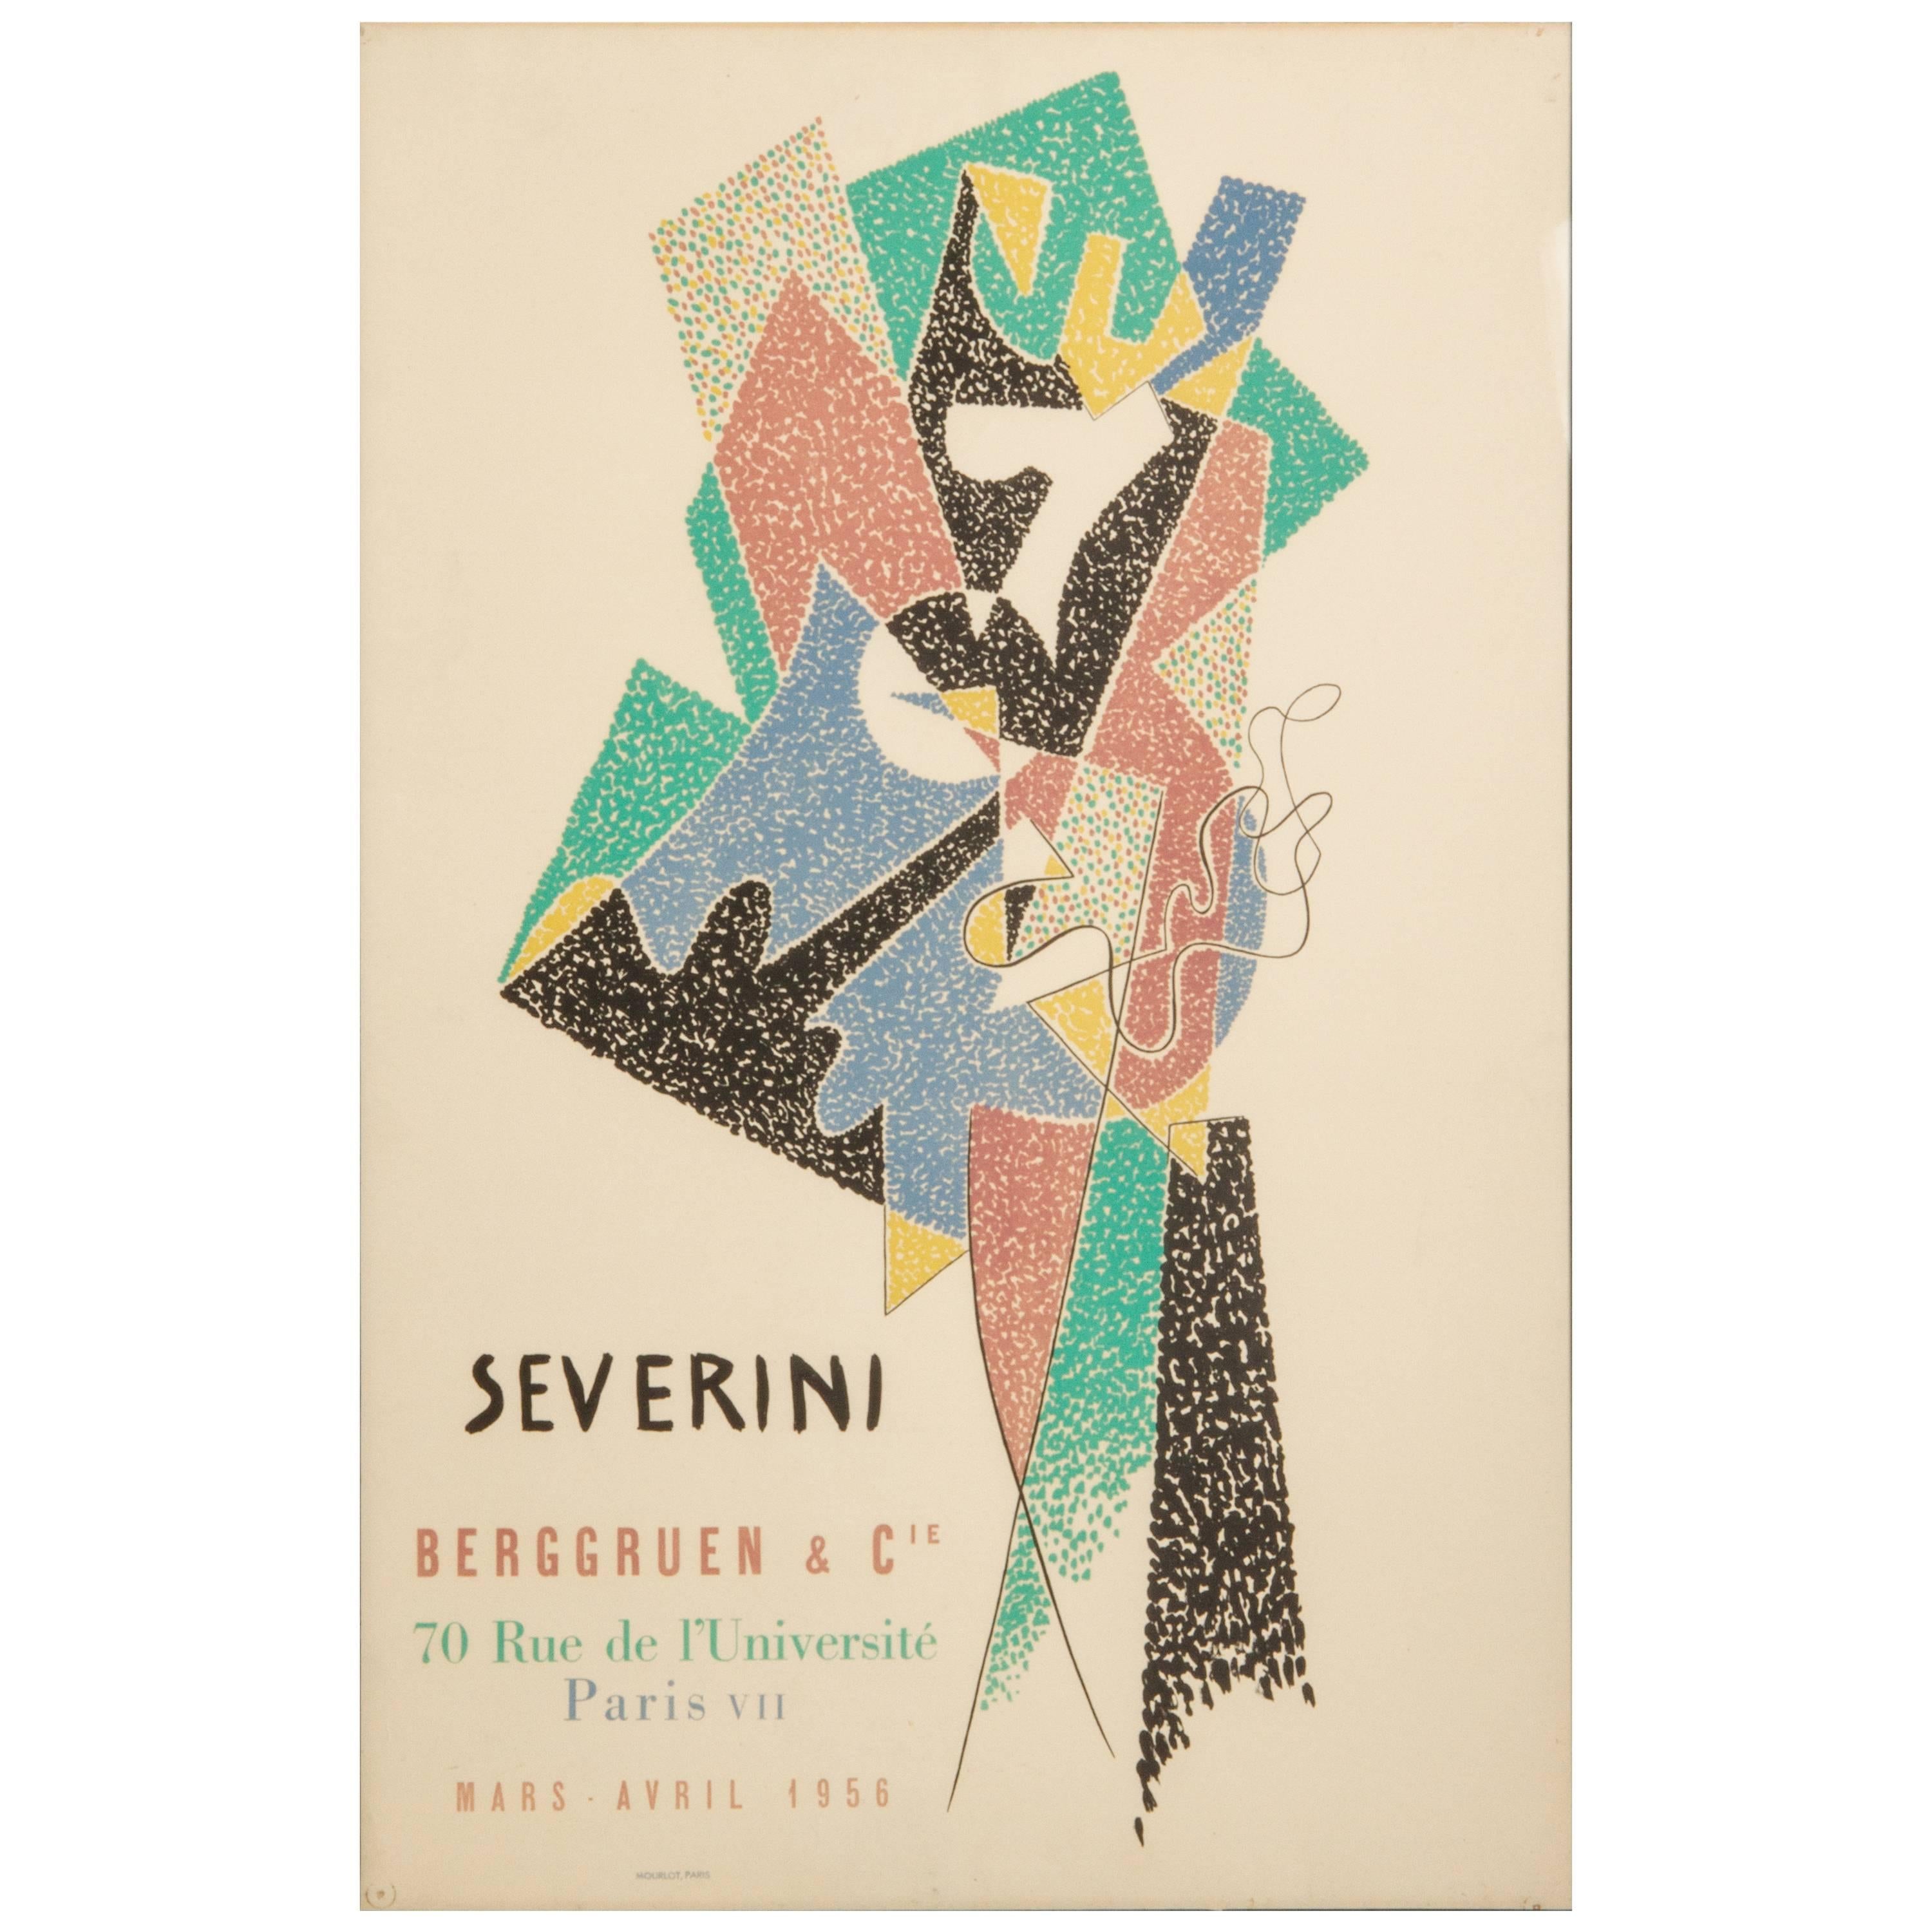 Cubist Exhibition Poster by Gino Severini